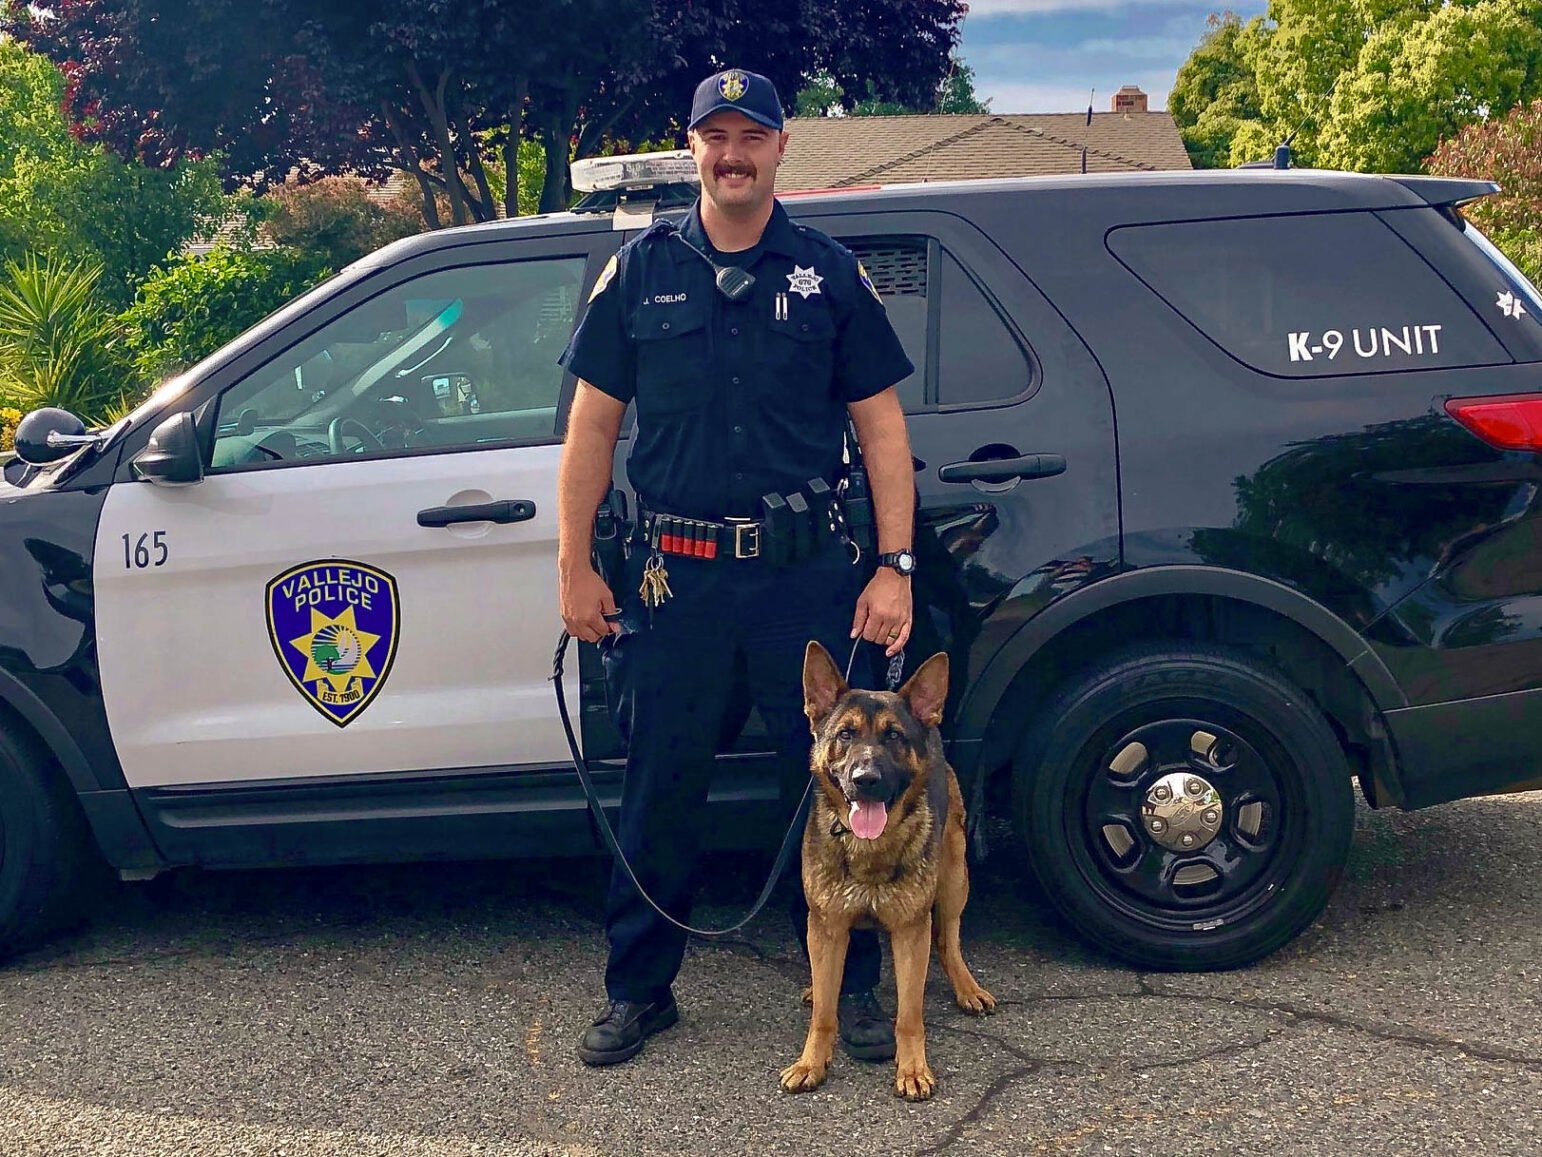 A police officer in uniform and a K-9 unit dog posing next to a police SUV. The officer, smiling and standing confidently, holds the leash of the German Shepherd, which sits beside him looking directly at the camera. The SUV has the Vallejo Police emblem and "K-9 UNIT" marked on it, set against a residential background with lush greenery.